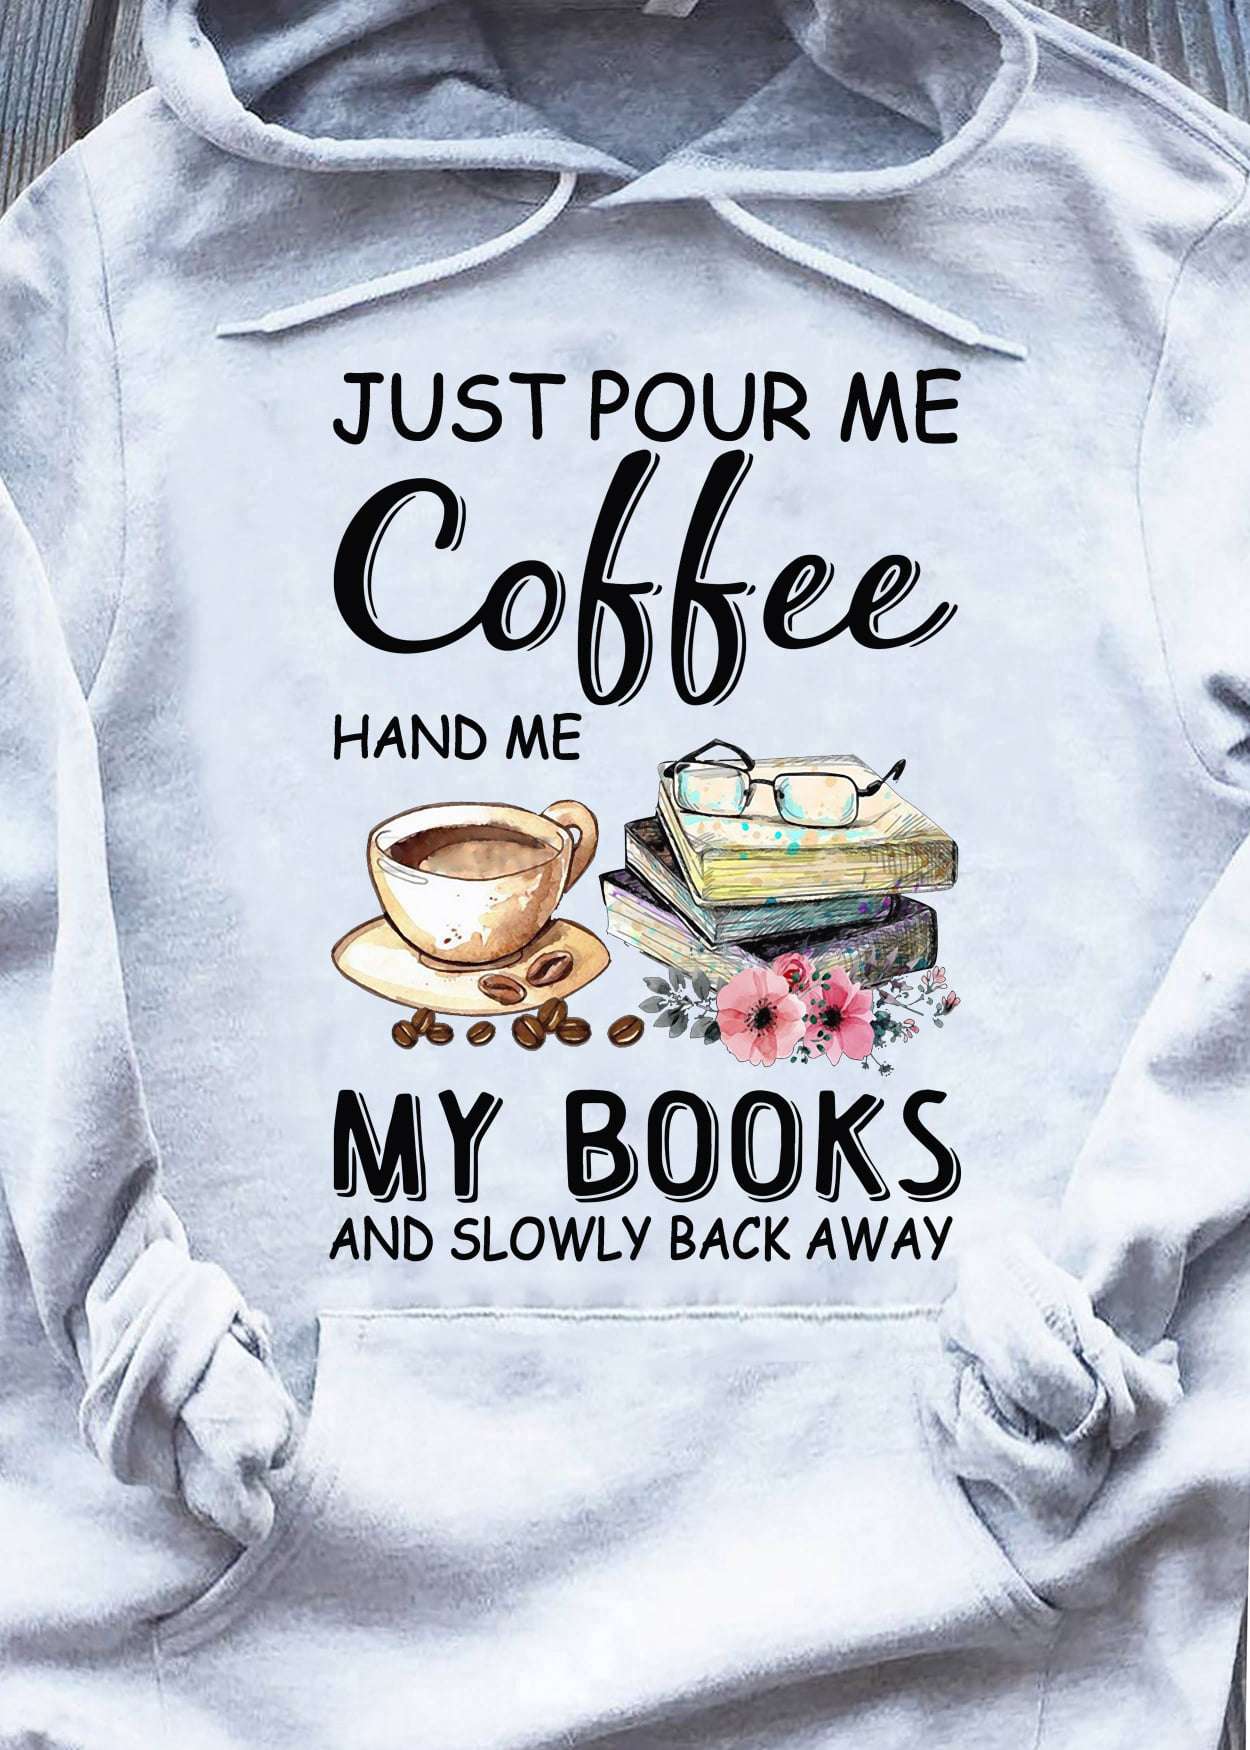 Books Coffee - Just pour me coffee hand me my books and slowly back away